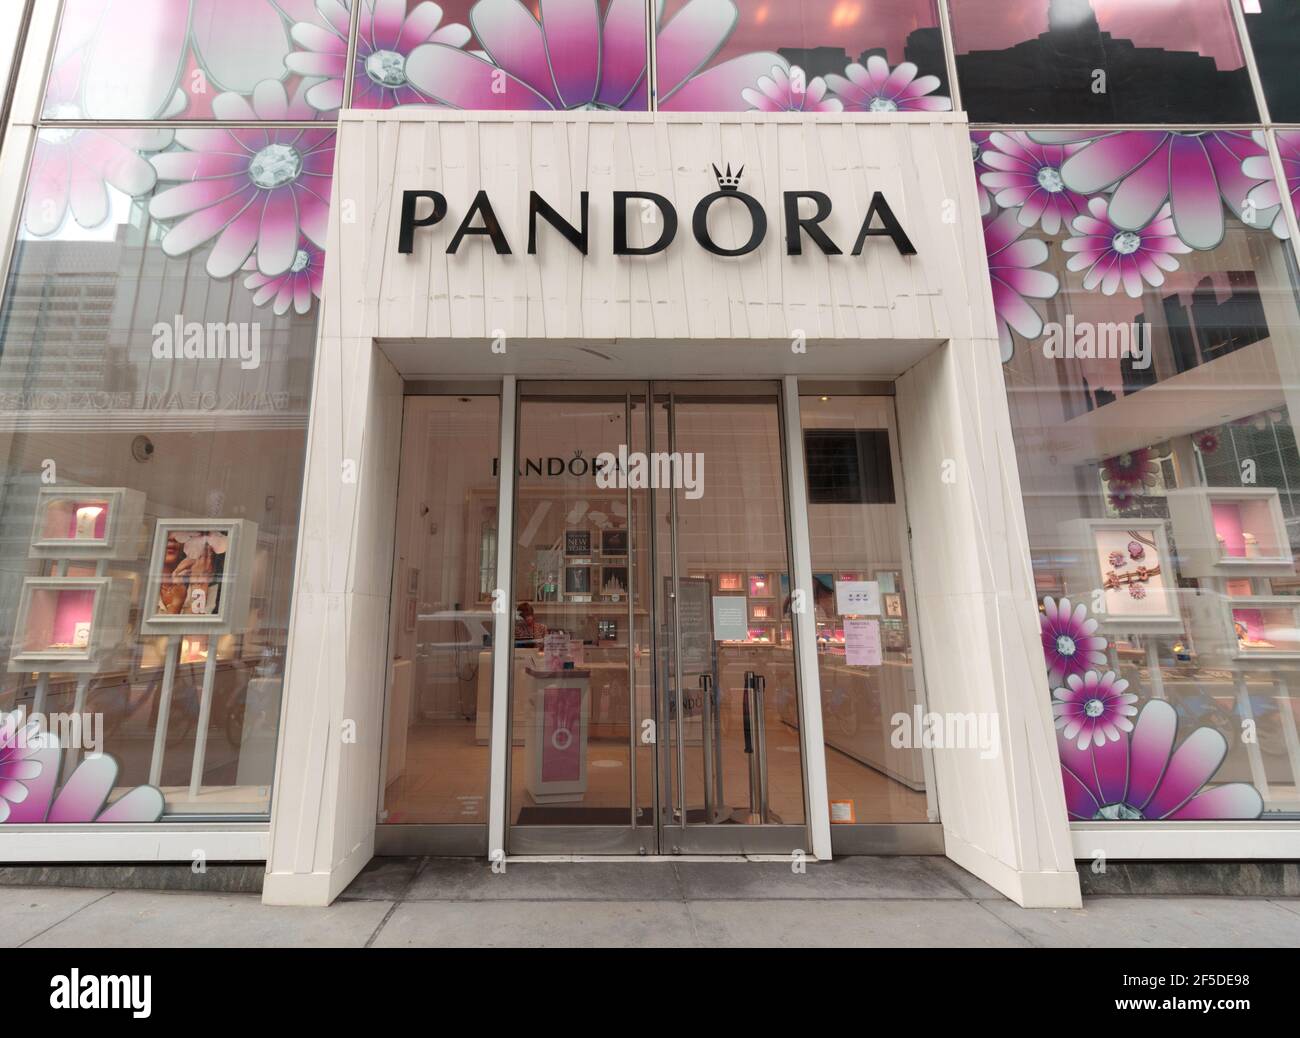 storefront of the Danish jewelry company Pandora A/S knwon for it's mass market charm bracelets, in midtown Manahattan, new york Stock Photo